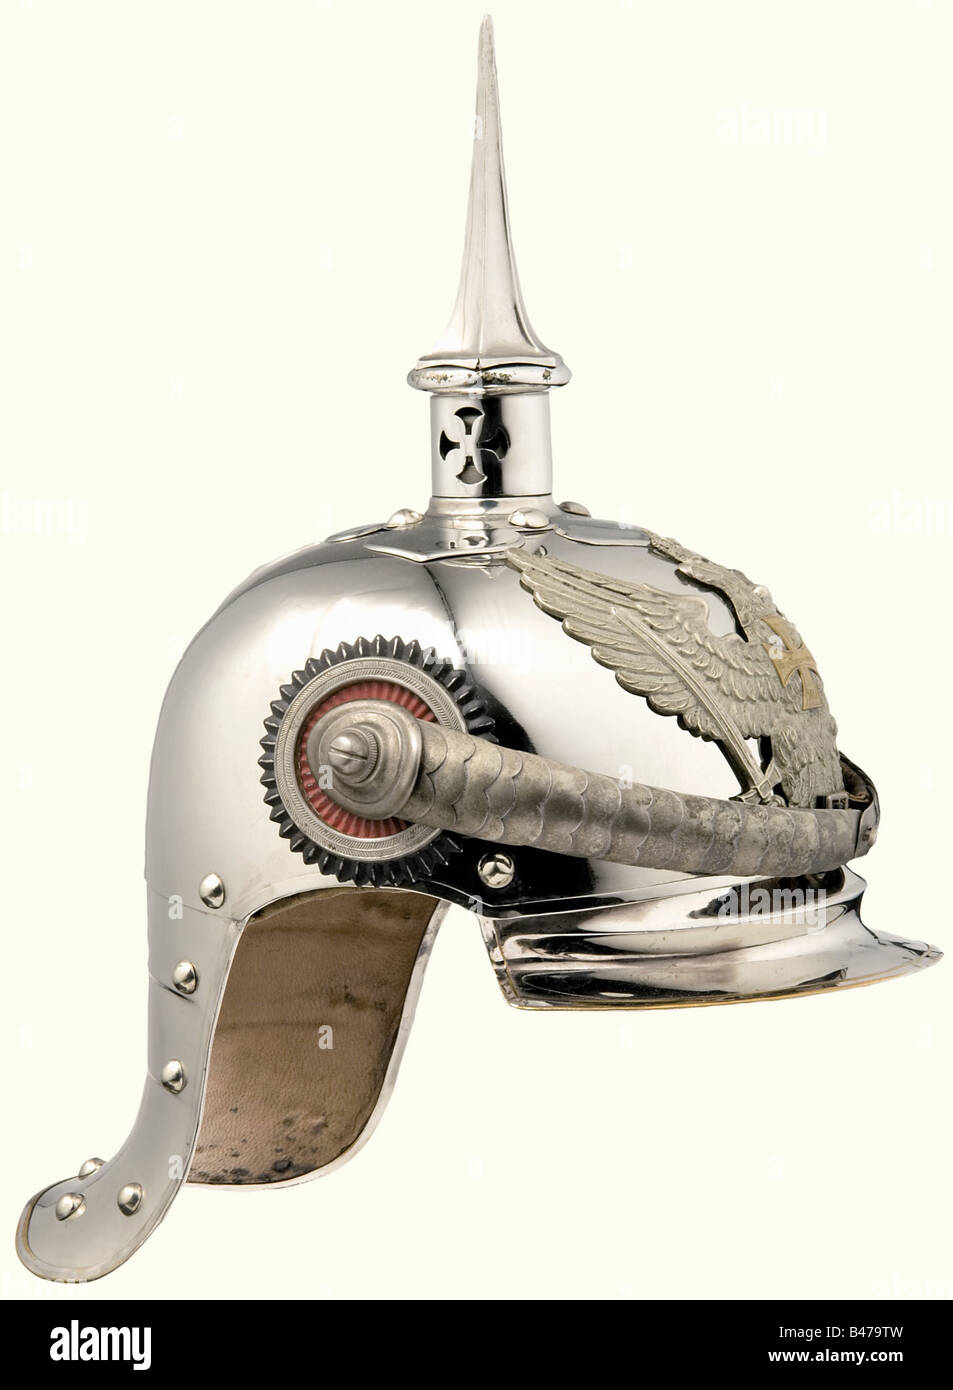 A reserve officer's helmet, for the Prussian Mounted Jäger Regiments 1 - 6 Late, elegant model from circa 1914. Nickel-plated steel bowl with nickel-plated or nickel silver mountings. The neck protector is of tombac with an attached ridge. The removable grooved spike (somewhat damaged) has a bayonet catch. Officers' cockades, non-standard silver (really gilded) convex metal chinscales of tombac, without the cloverleaf attachments. Brim and neck protector are leather lined (somewhat spotted). Leather sweatband (handwritten inscription, 'Fähnrich Jäger z. Pferd R, Stock Photo